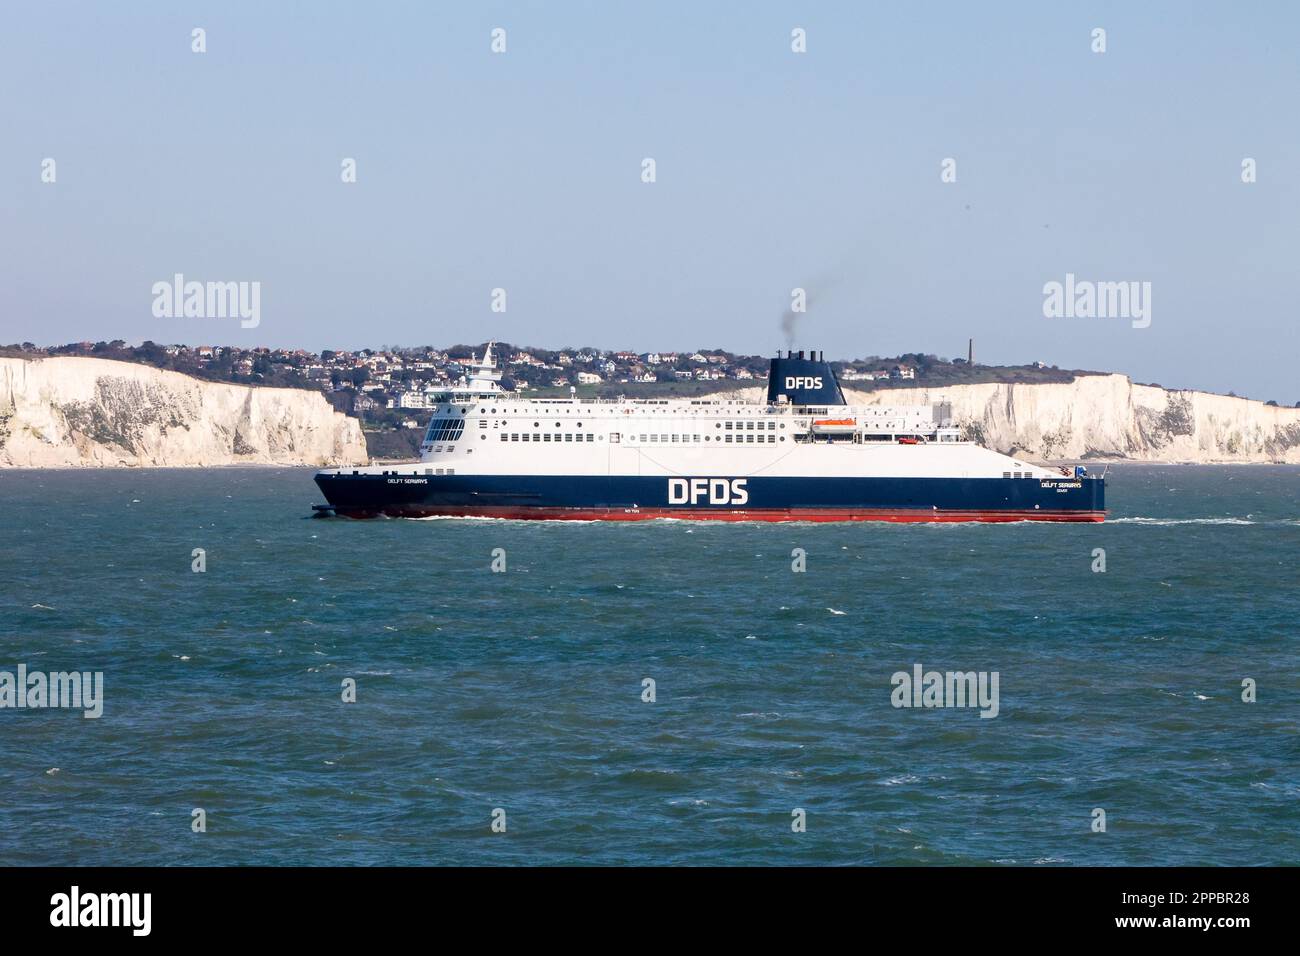 White Cliffs of Dover,and,another,DFDS Ferry,heading,to,Dover from Calais,On board,DFDS Ferry,heading,from,Dover,Port of Dover,England,English,British,GB,Great Britain,UK,United Kingdom,to,Calais,France,French,Europe,European, Stock Photo